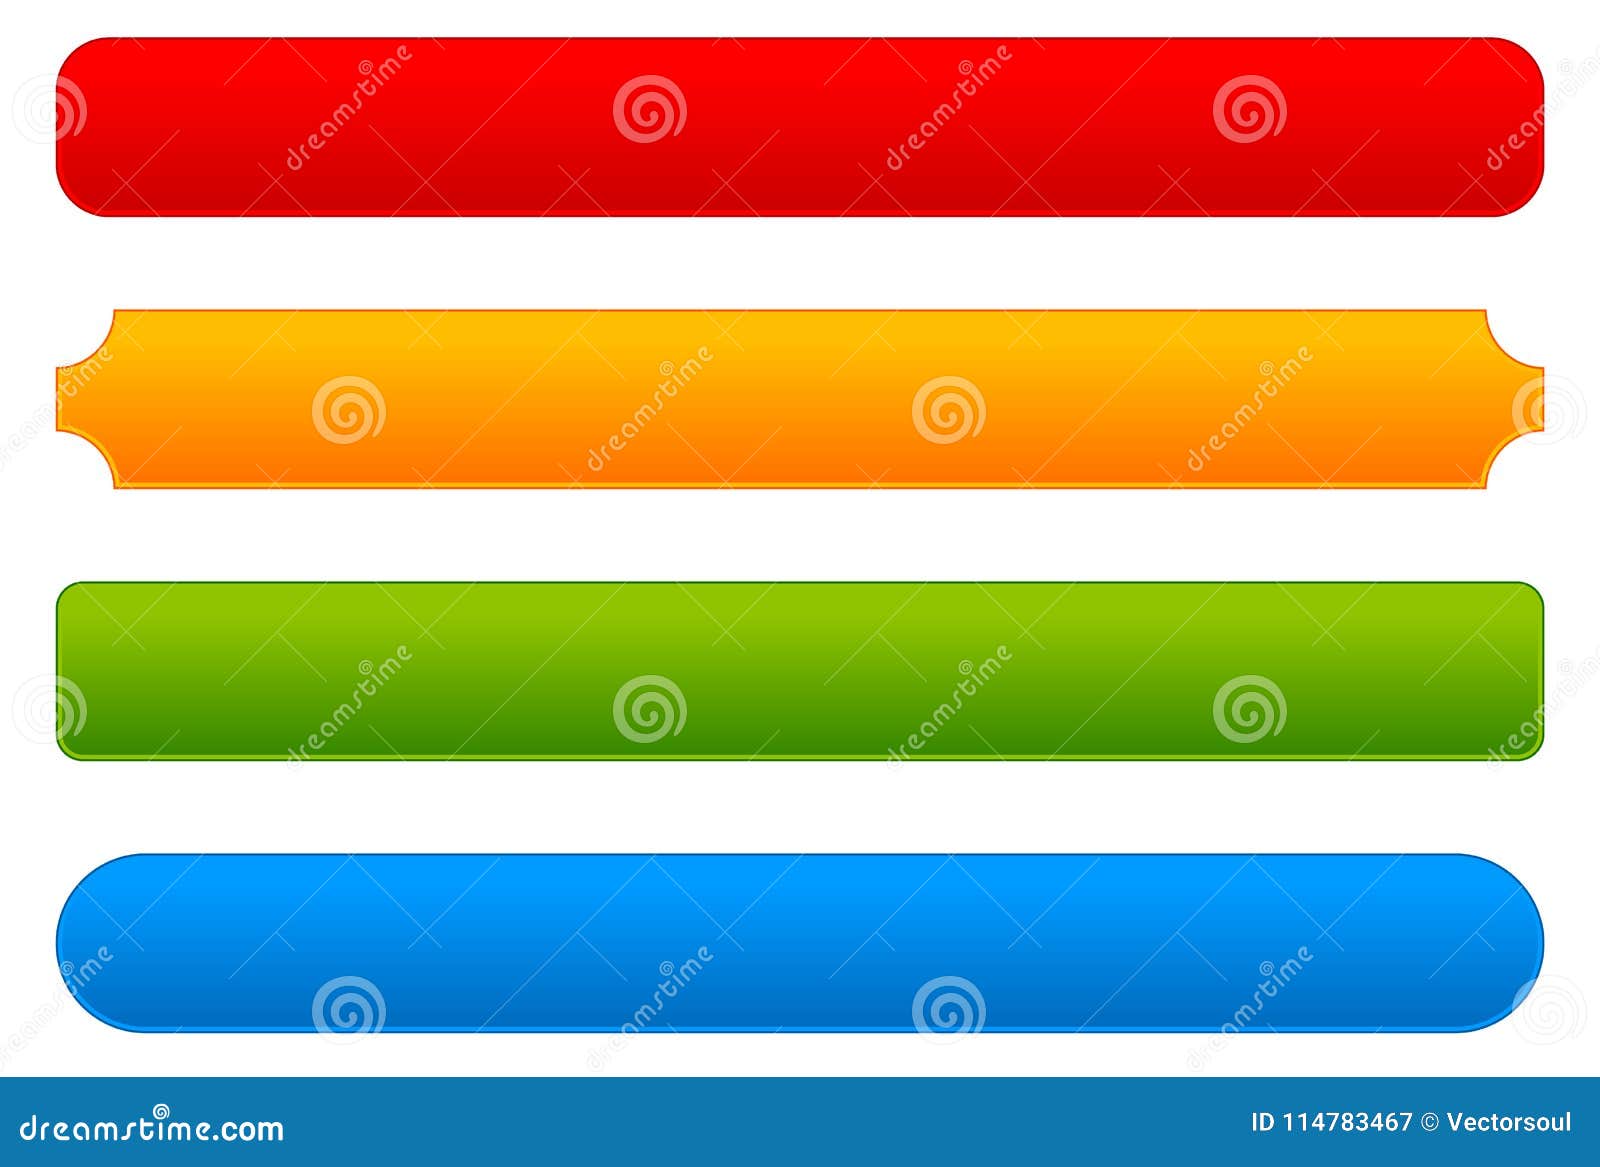 Button, Bar, Banner Backgrounds with Different Corners Stock Vector ...